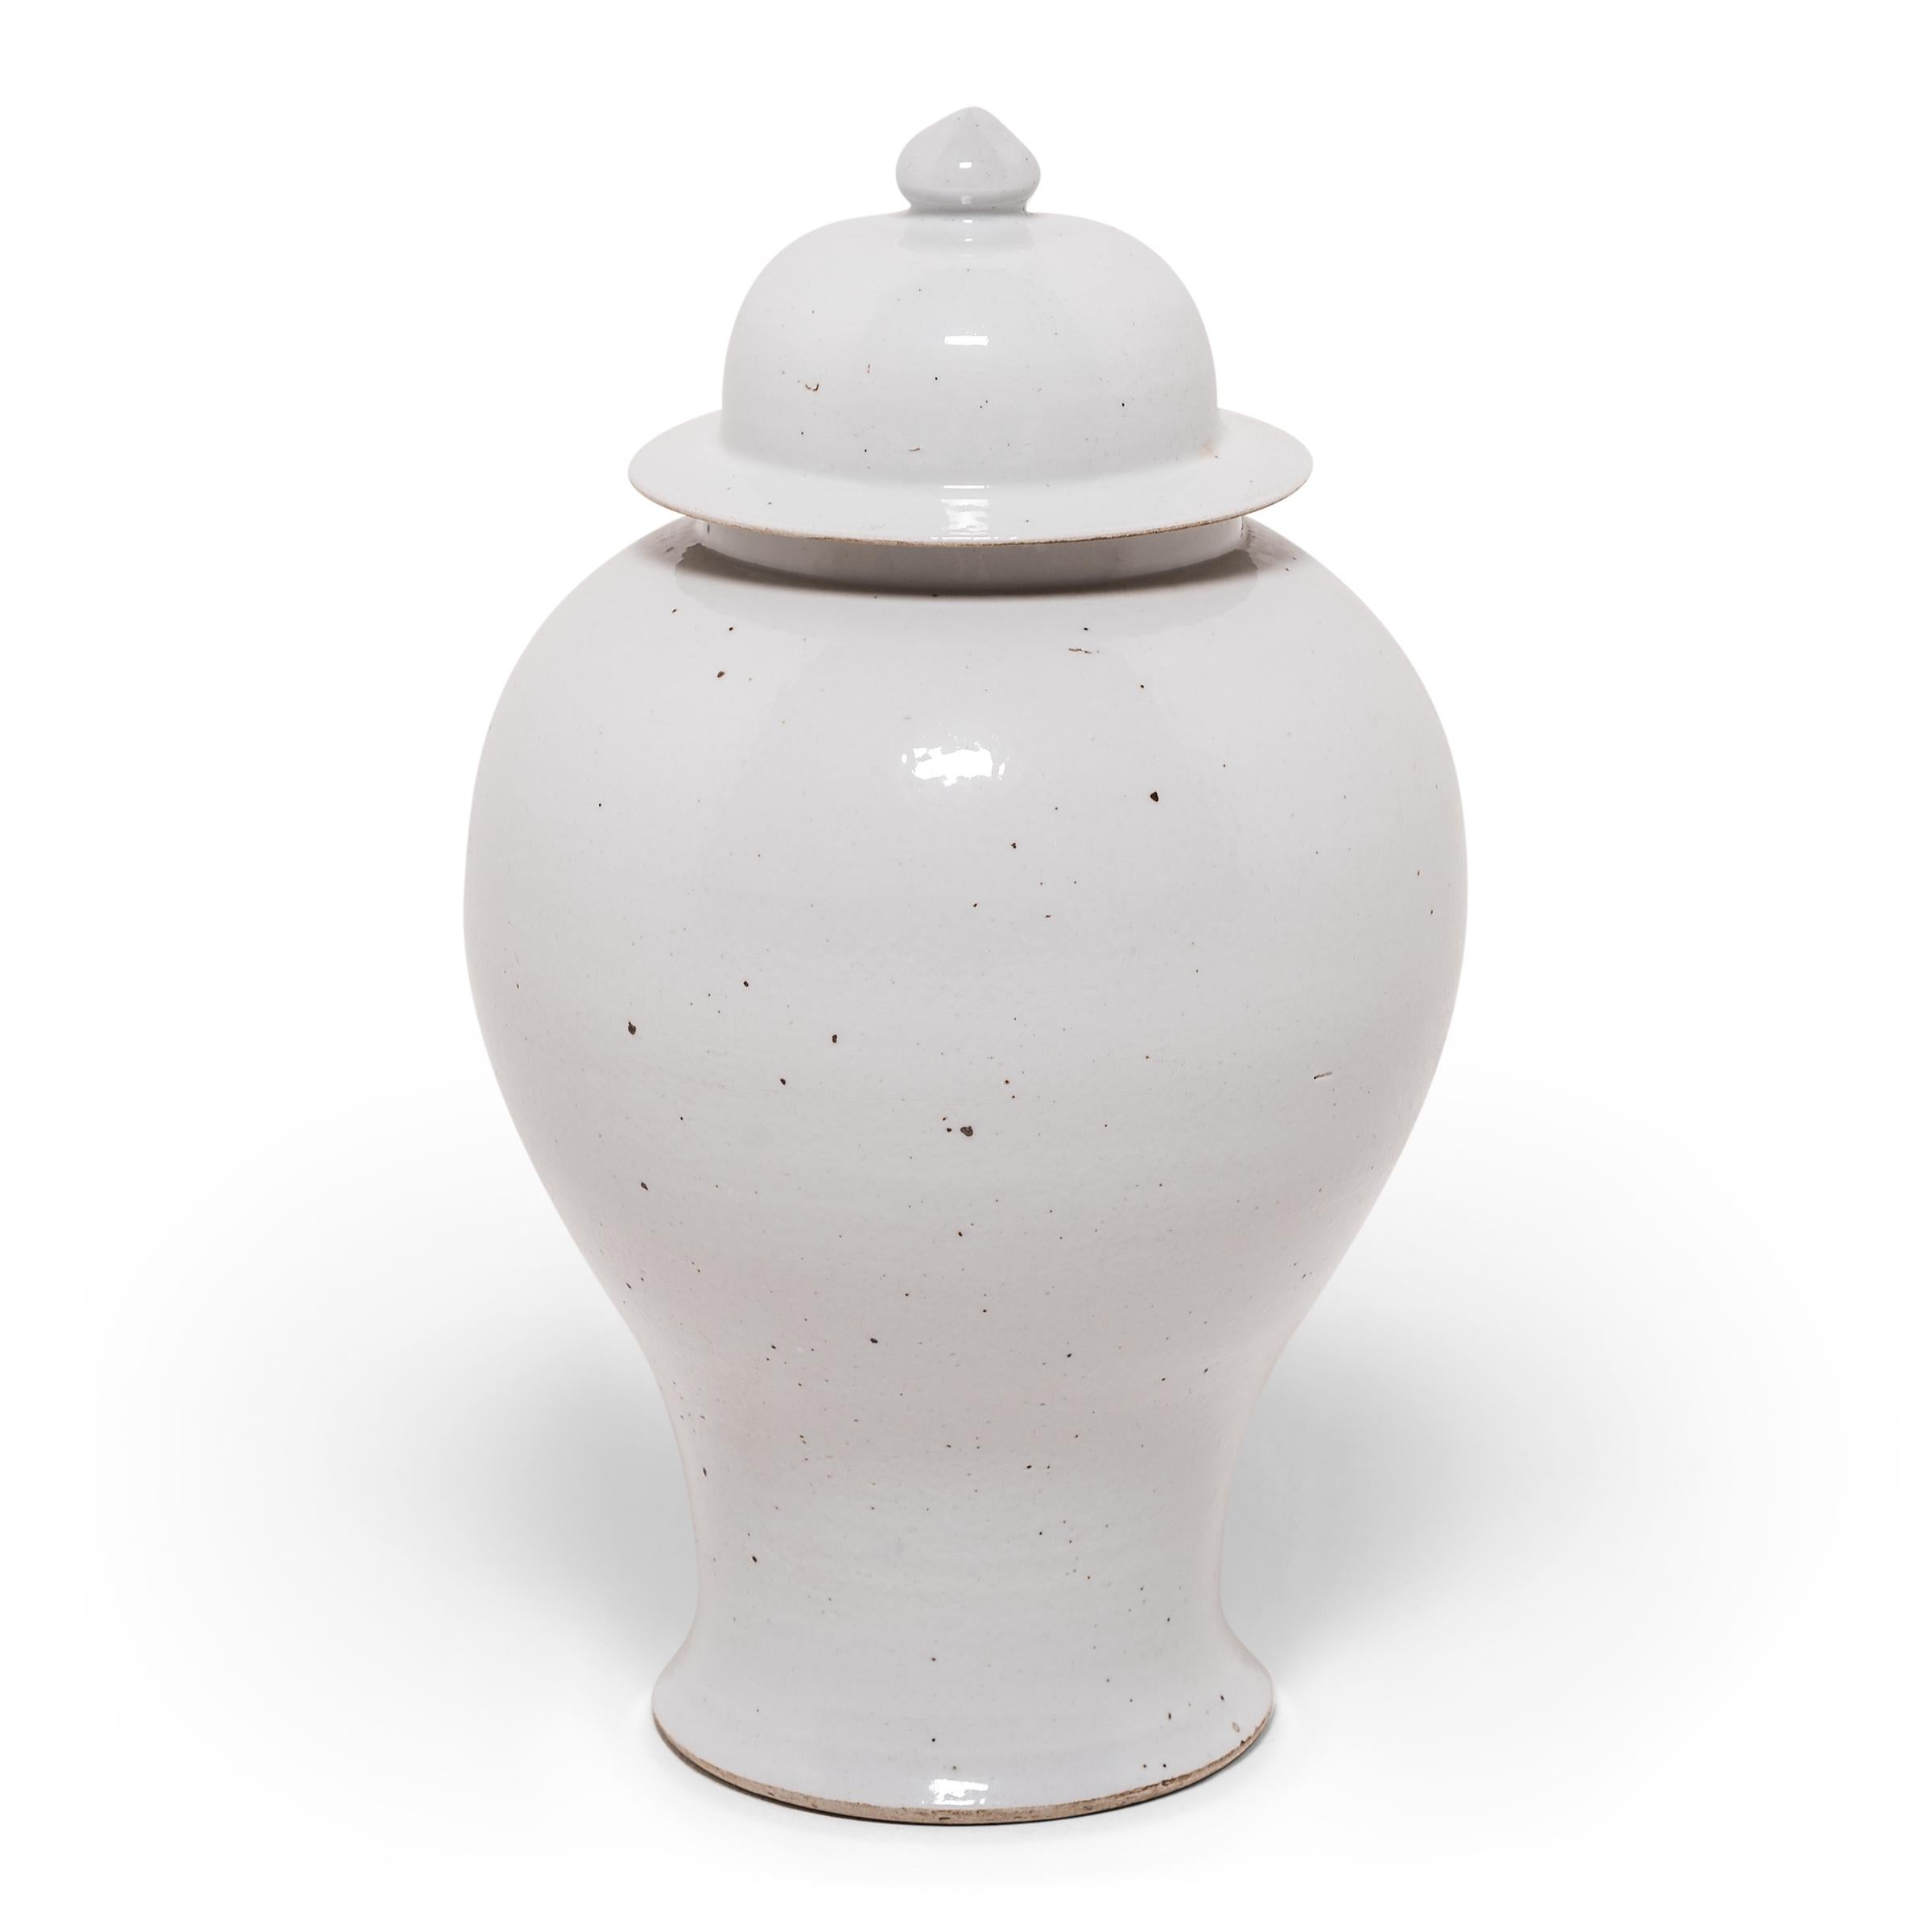 This contemporary take on the traditional ginger jar puts all the focus on the timeless Silhouette. Characterized by its rounded body, high shoulders, and domed lid, the elegant ginger jar form is accentuated here with a clean, white monochromatic